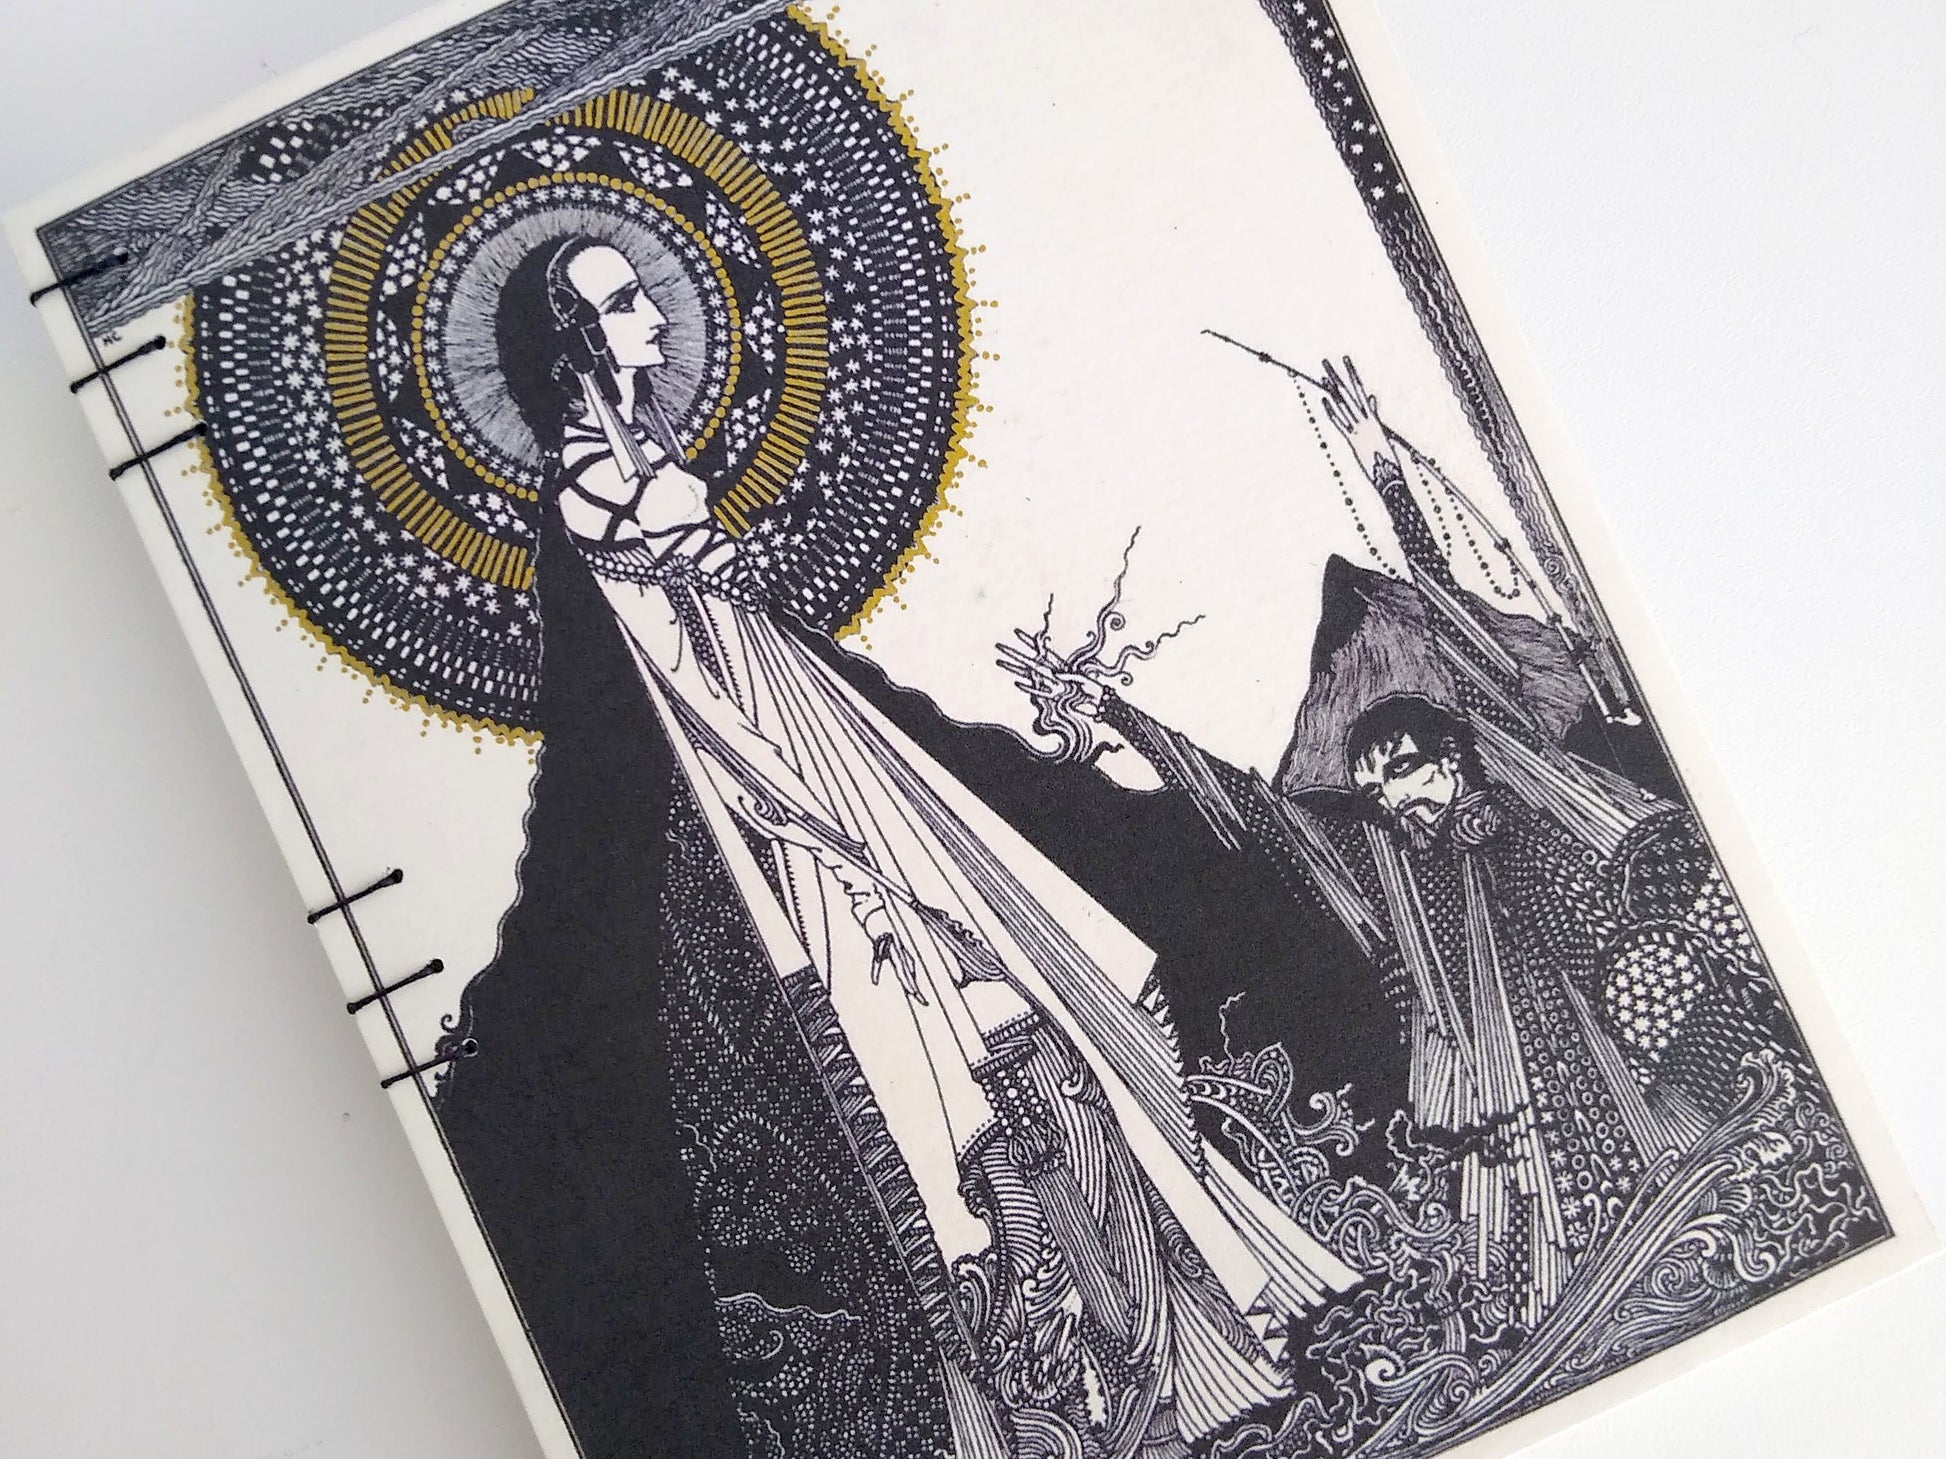 A closeup of a handmade journal on a white background. The cover of the journal is cream with printed with an illustration by Harry Clarke. It has a woman standing with a stylized halo/starburst behind her head with a man in supplication at her feet.